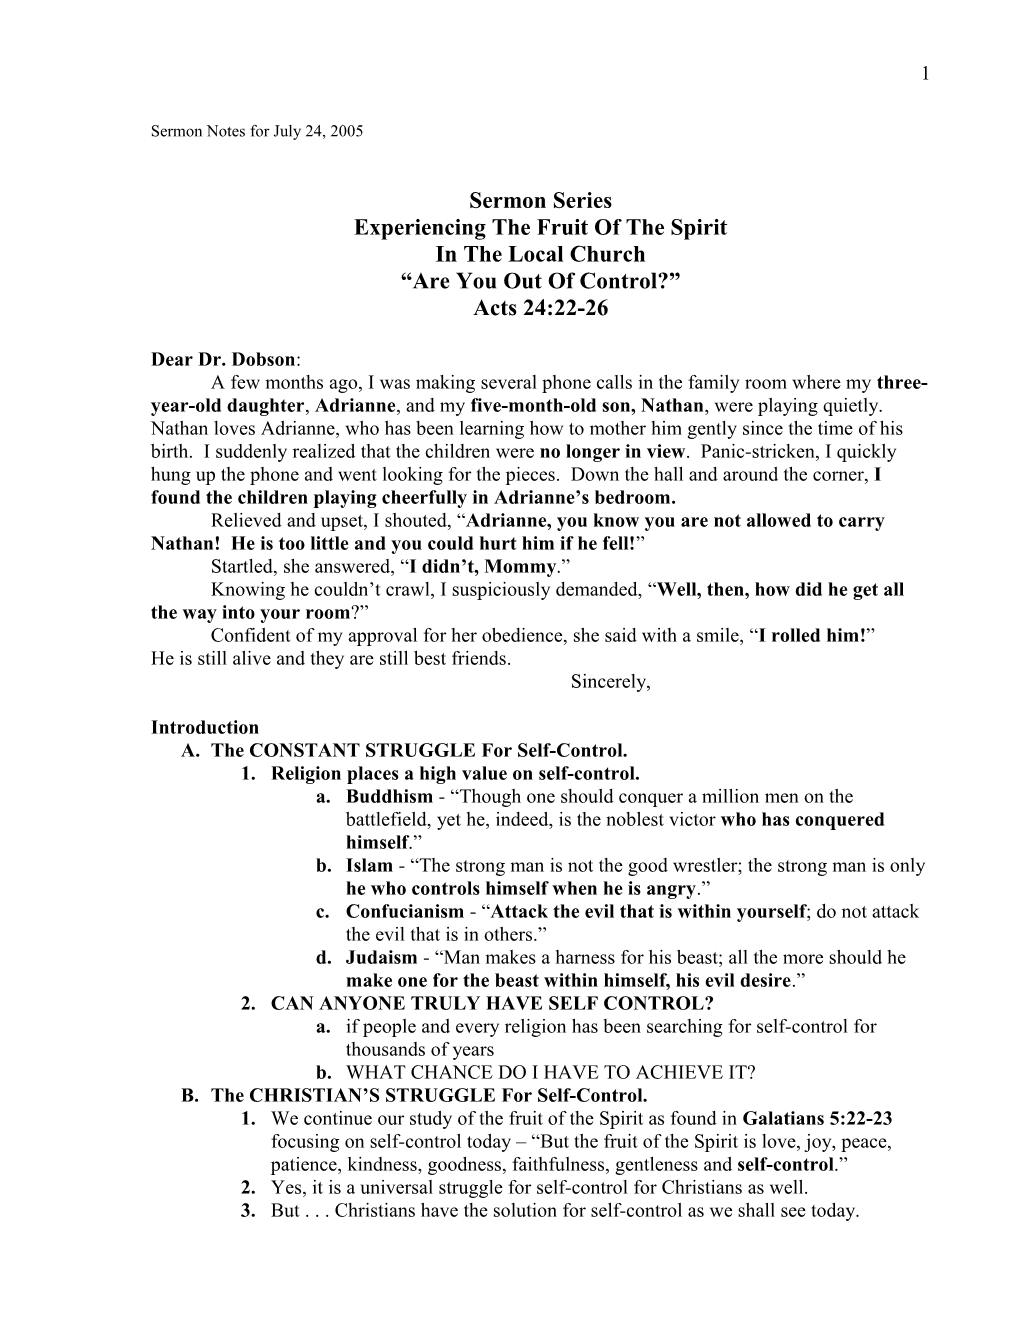 Sermon Notes for July 24, 2005